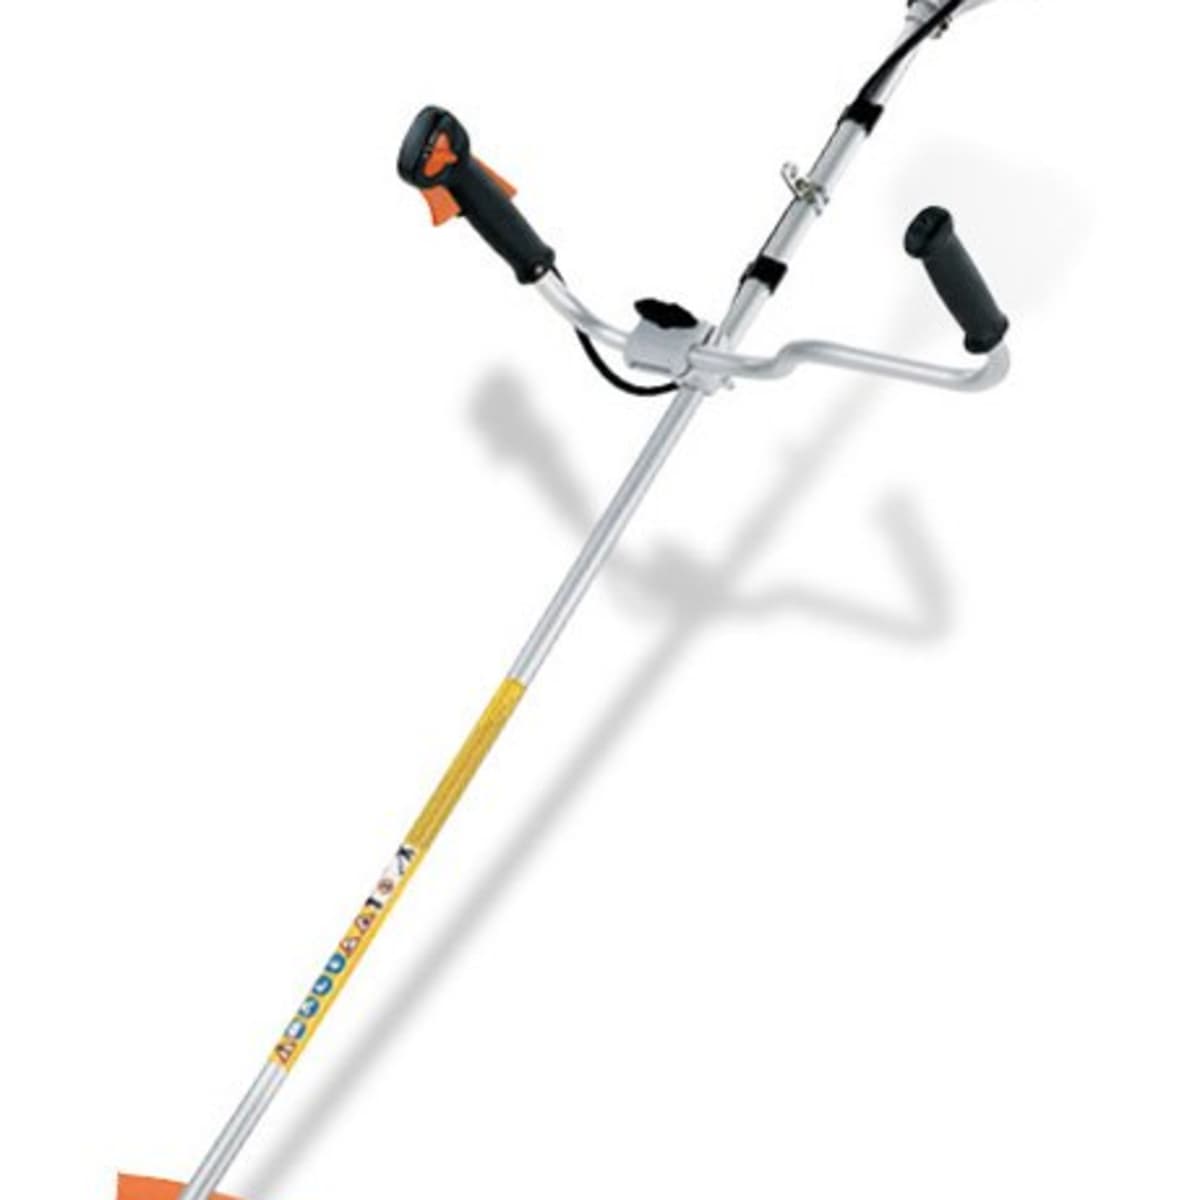 stihl lawn trimmers for sale